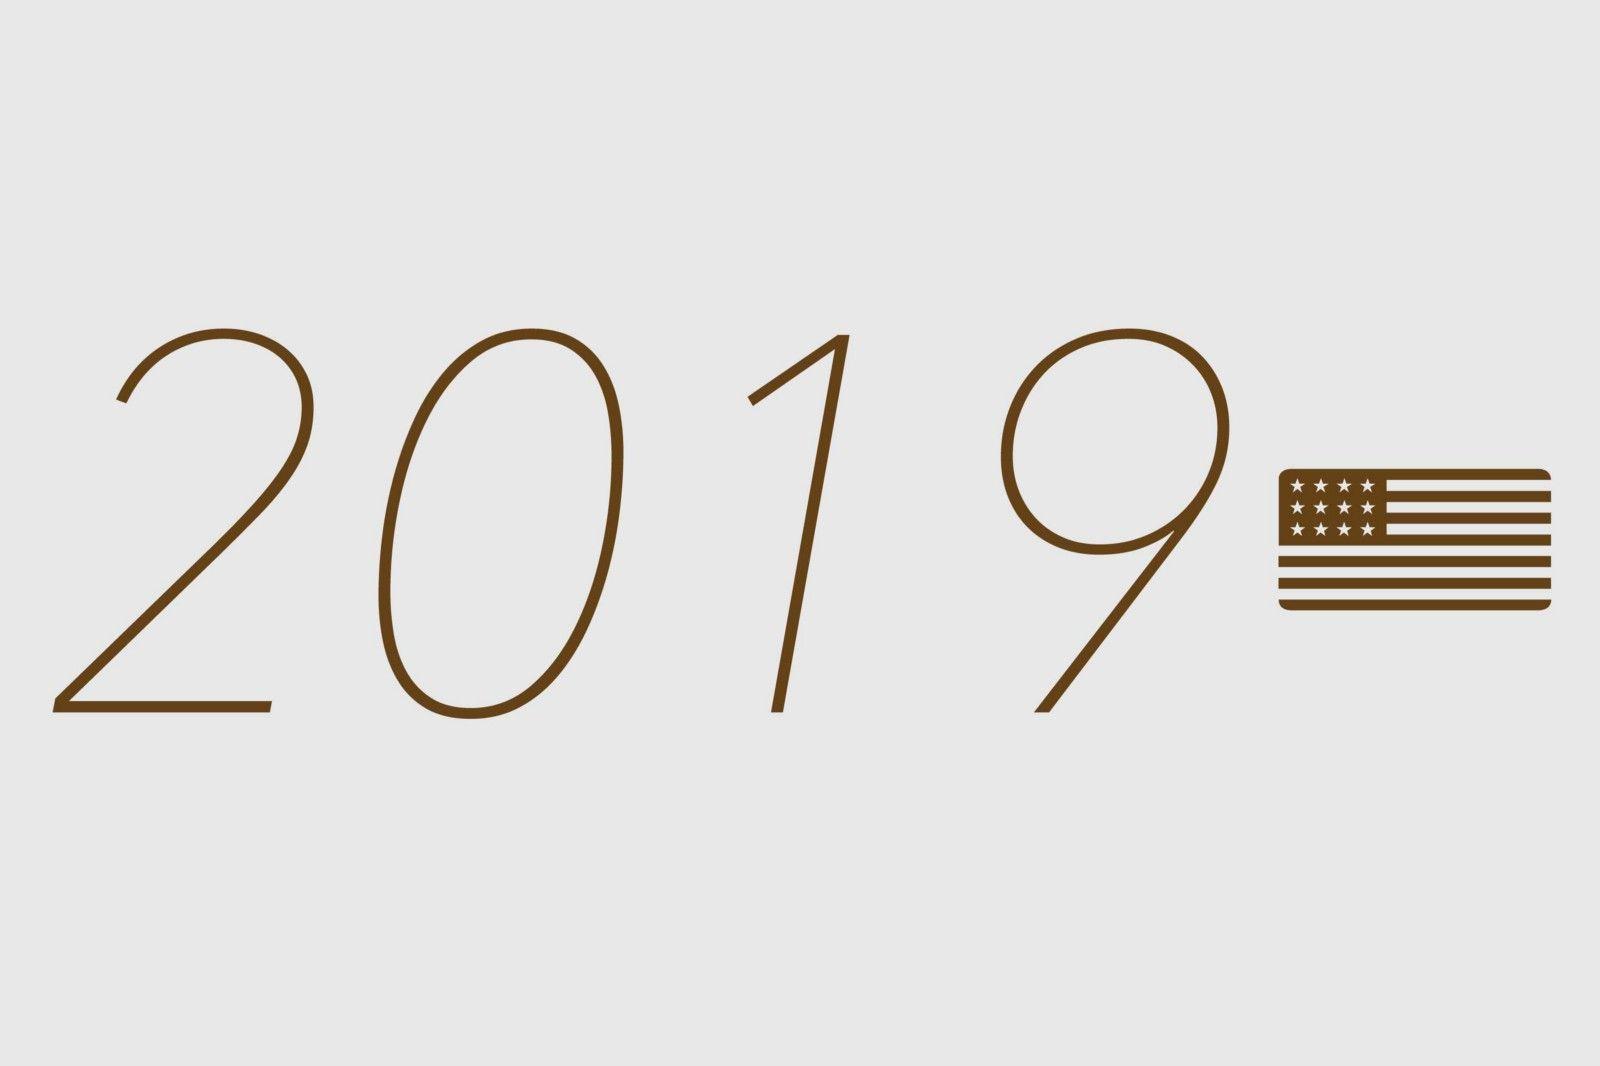 Red Asian S Logo - Will 2019 be the year of Asians in America?